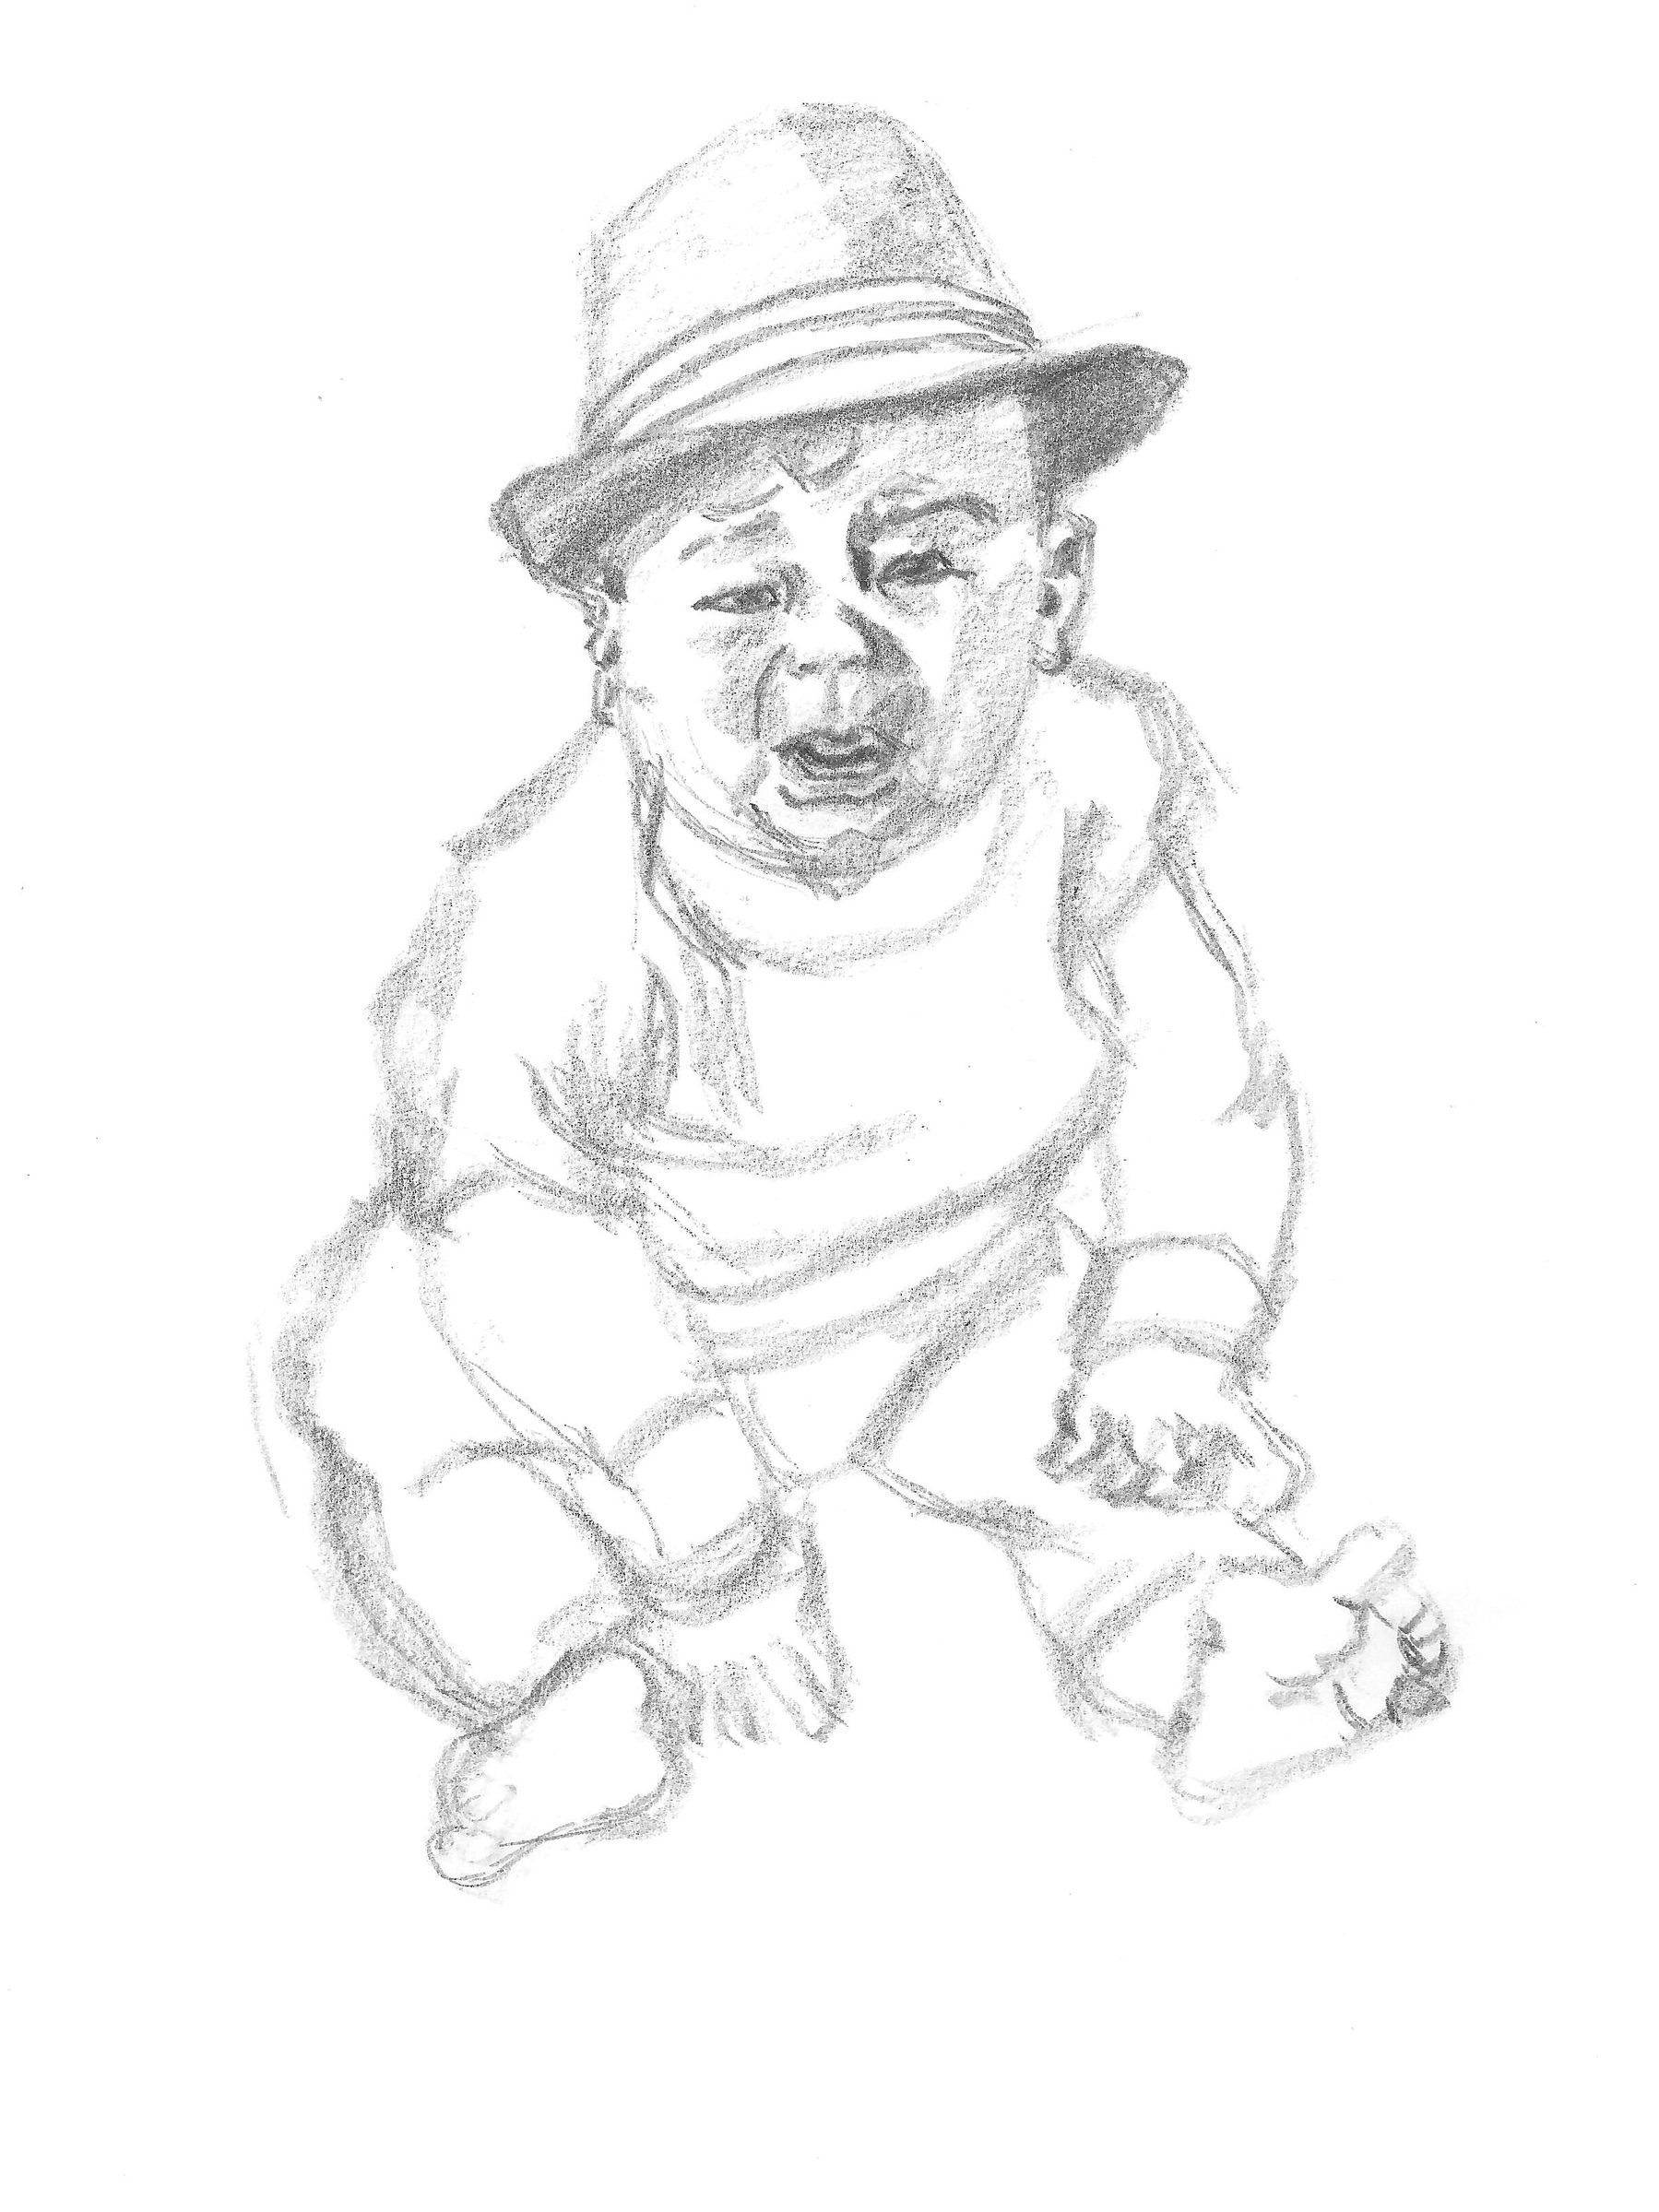 pencil sketch of a little boy with hat on, crying